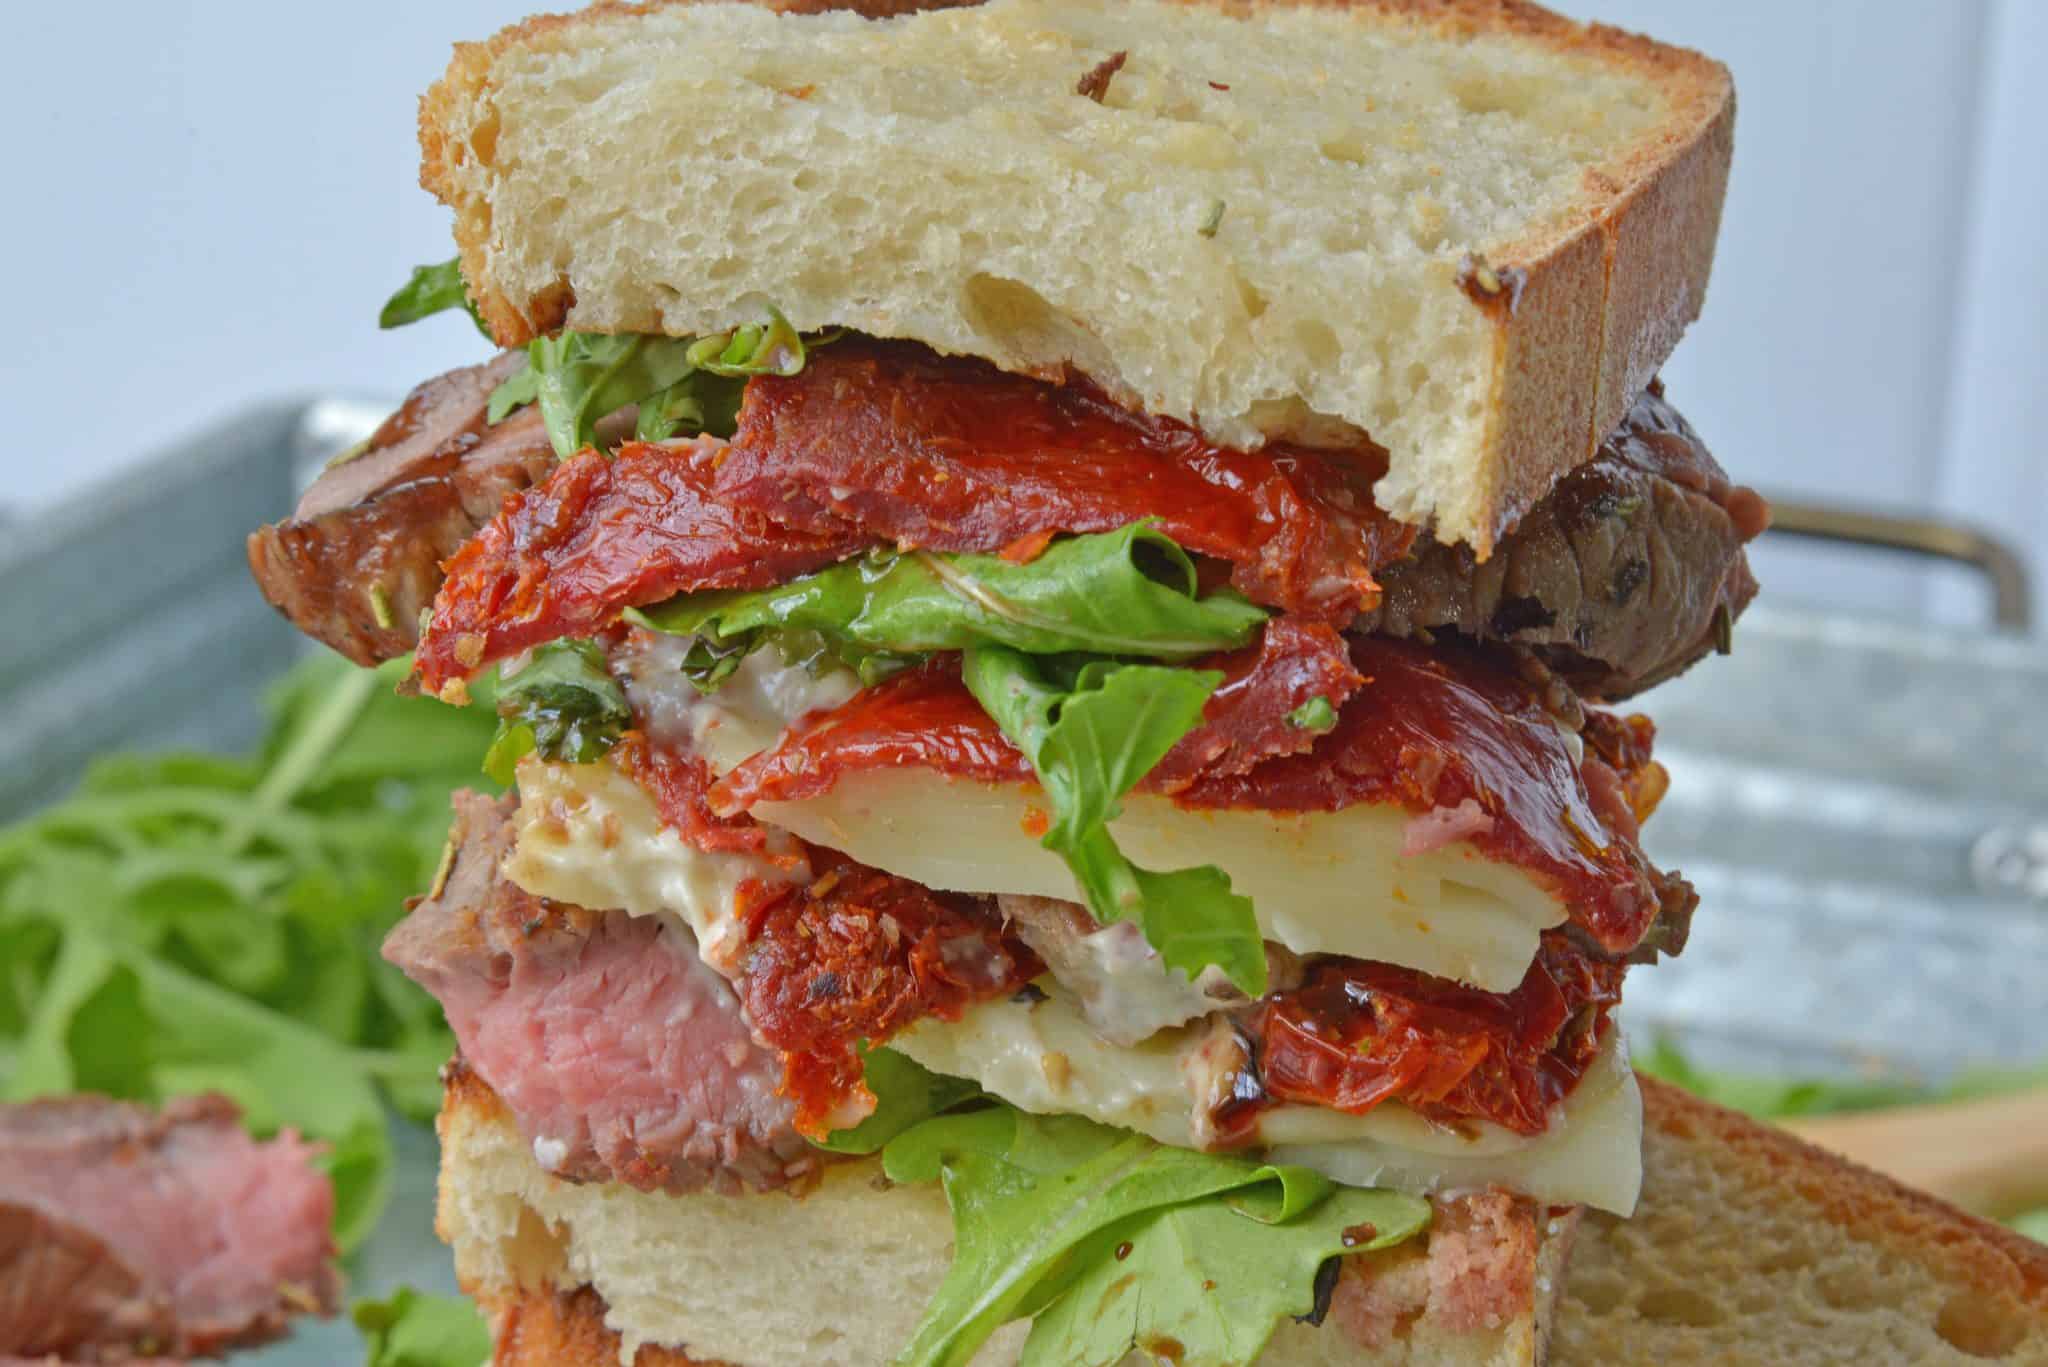 Insane Steak Sandwiches are gourmet sandwiches, seasoned to perfection with zesty Italian herbs and toppings. The best steak sandwich recipe ever! #steaksandwiches #gourmetsandwiches www.savoryexperiments.com